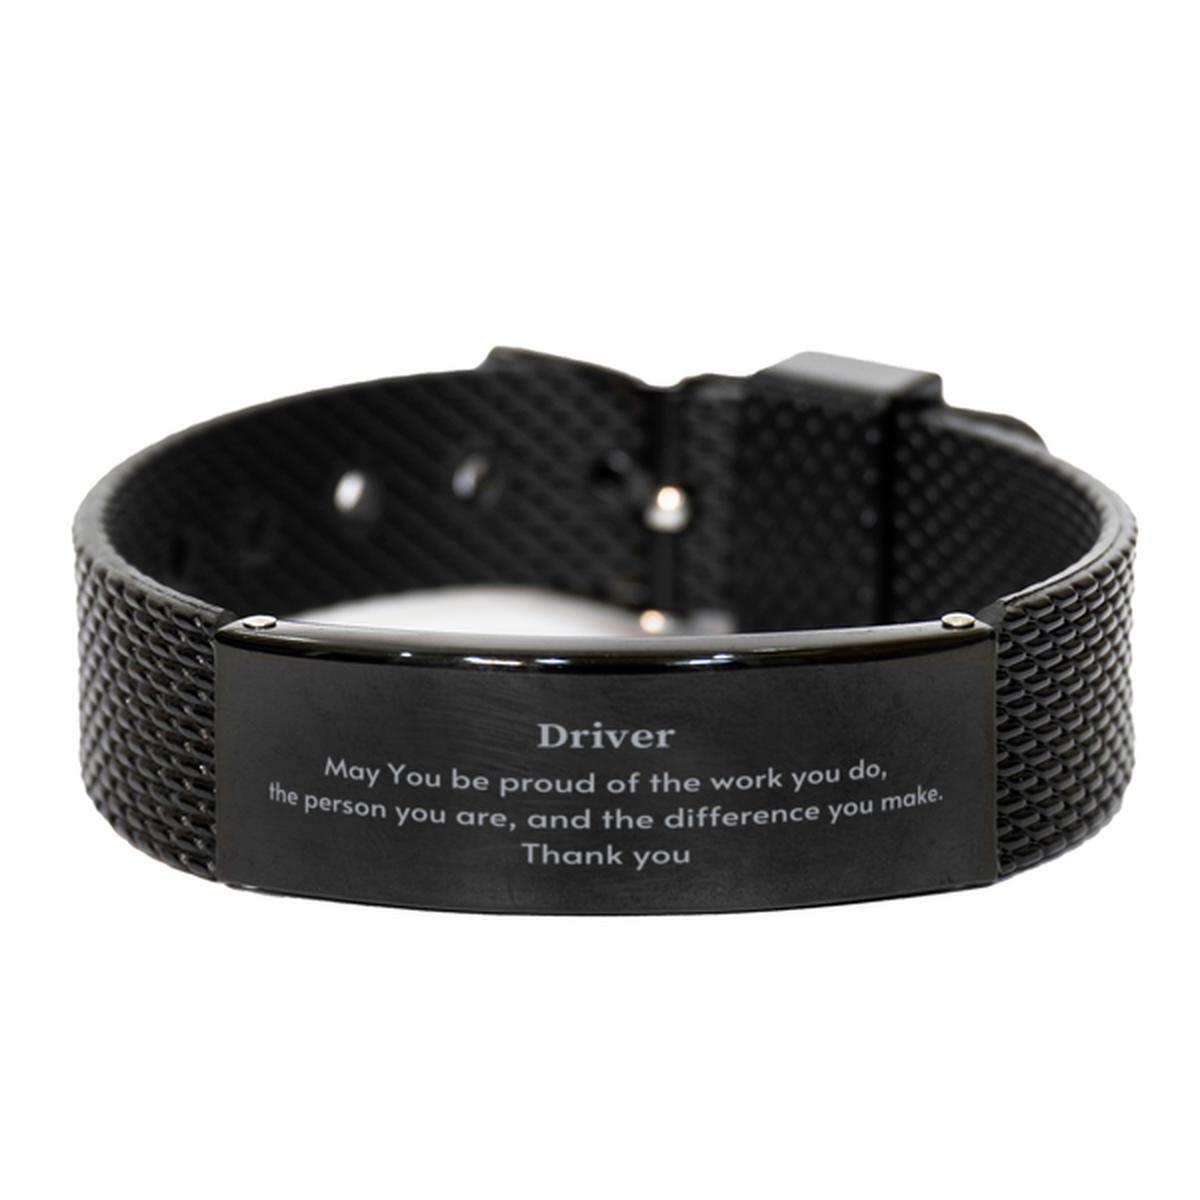 Heartwarming Black Shark Mesh Bracelet Retirement Coworkers Gifts for Driver, Driver May You be proud of the work you do, the person you are Gifts for Boss Men Women Friends